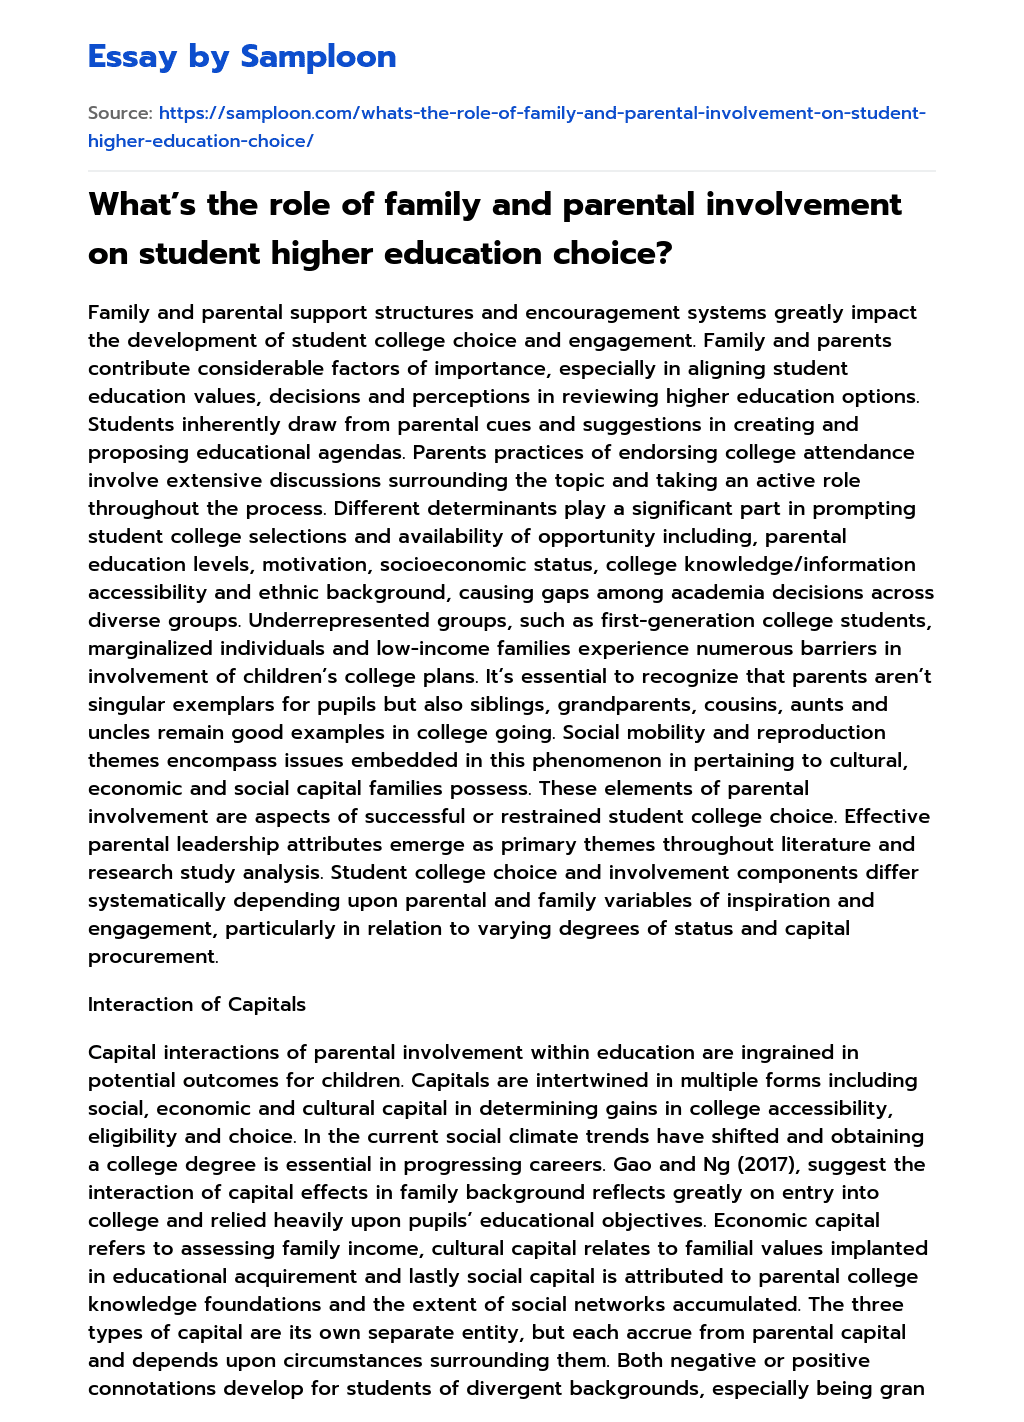 What’s the role of family and parental involvement on student higher education choice? essay